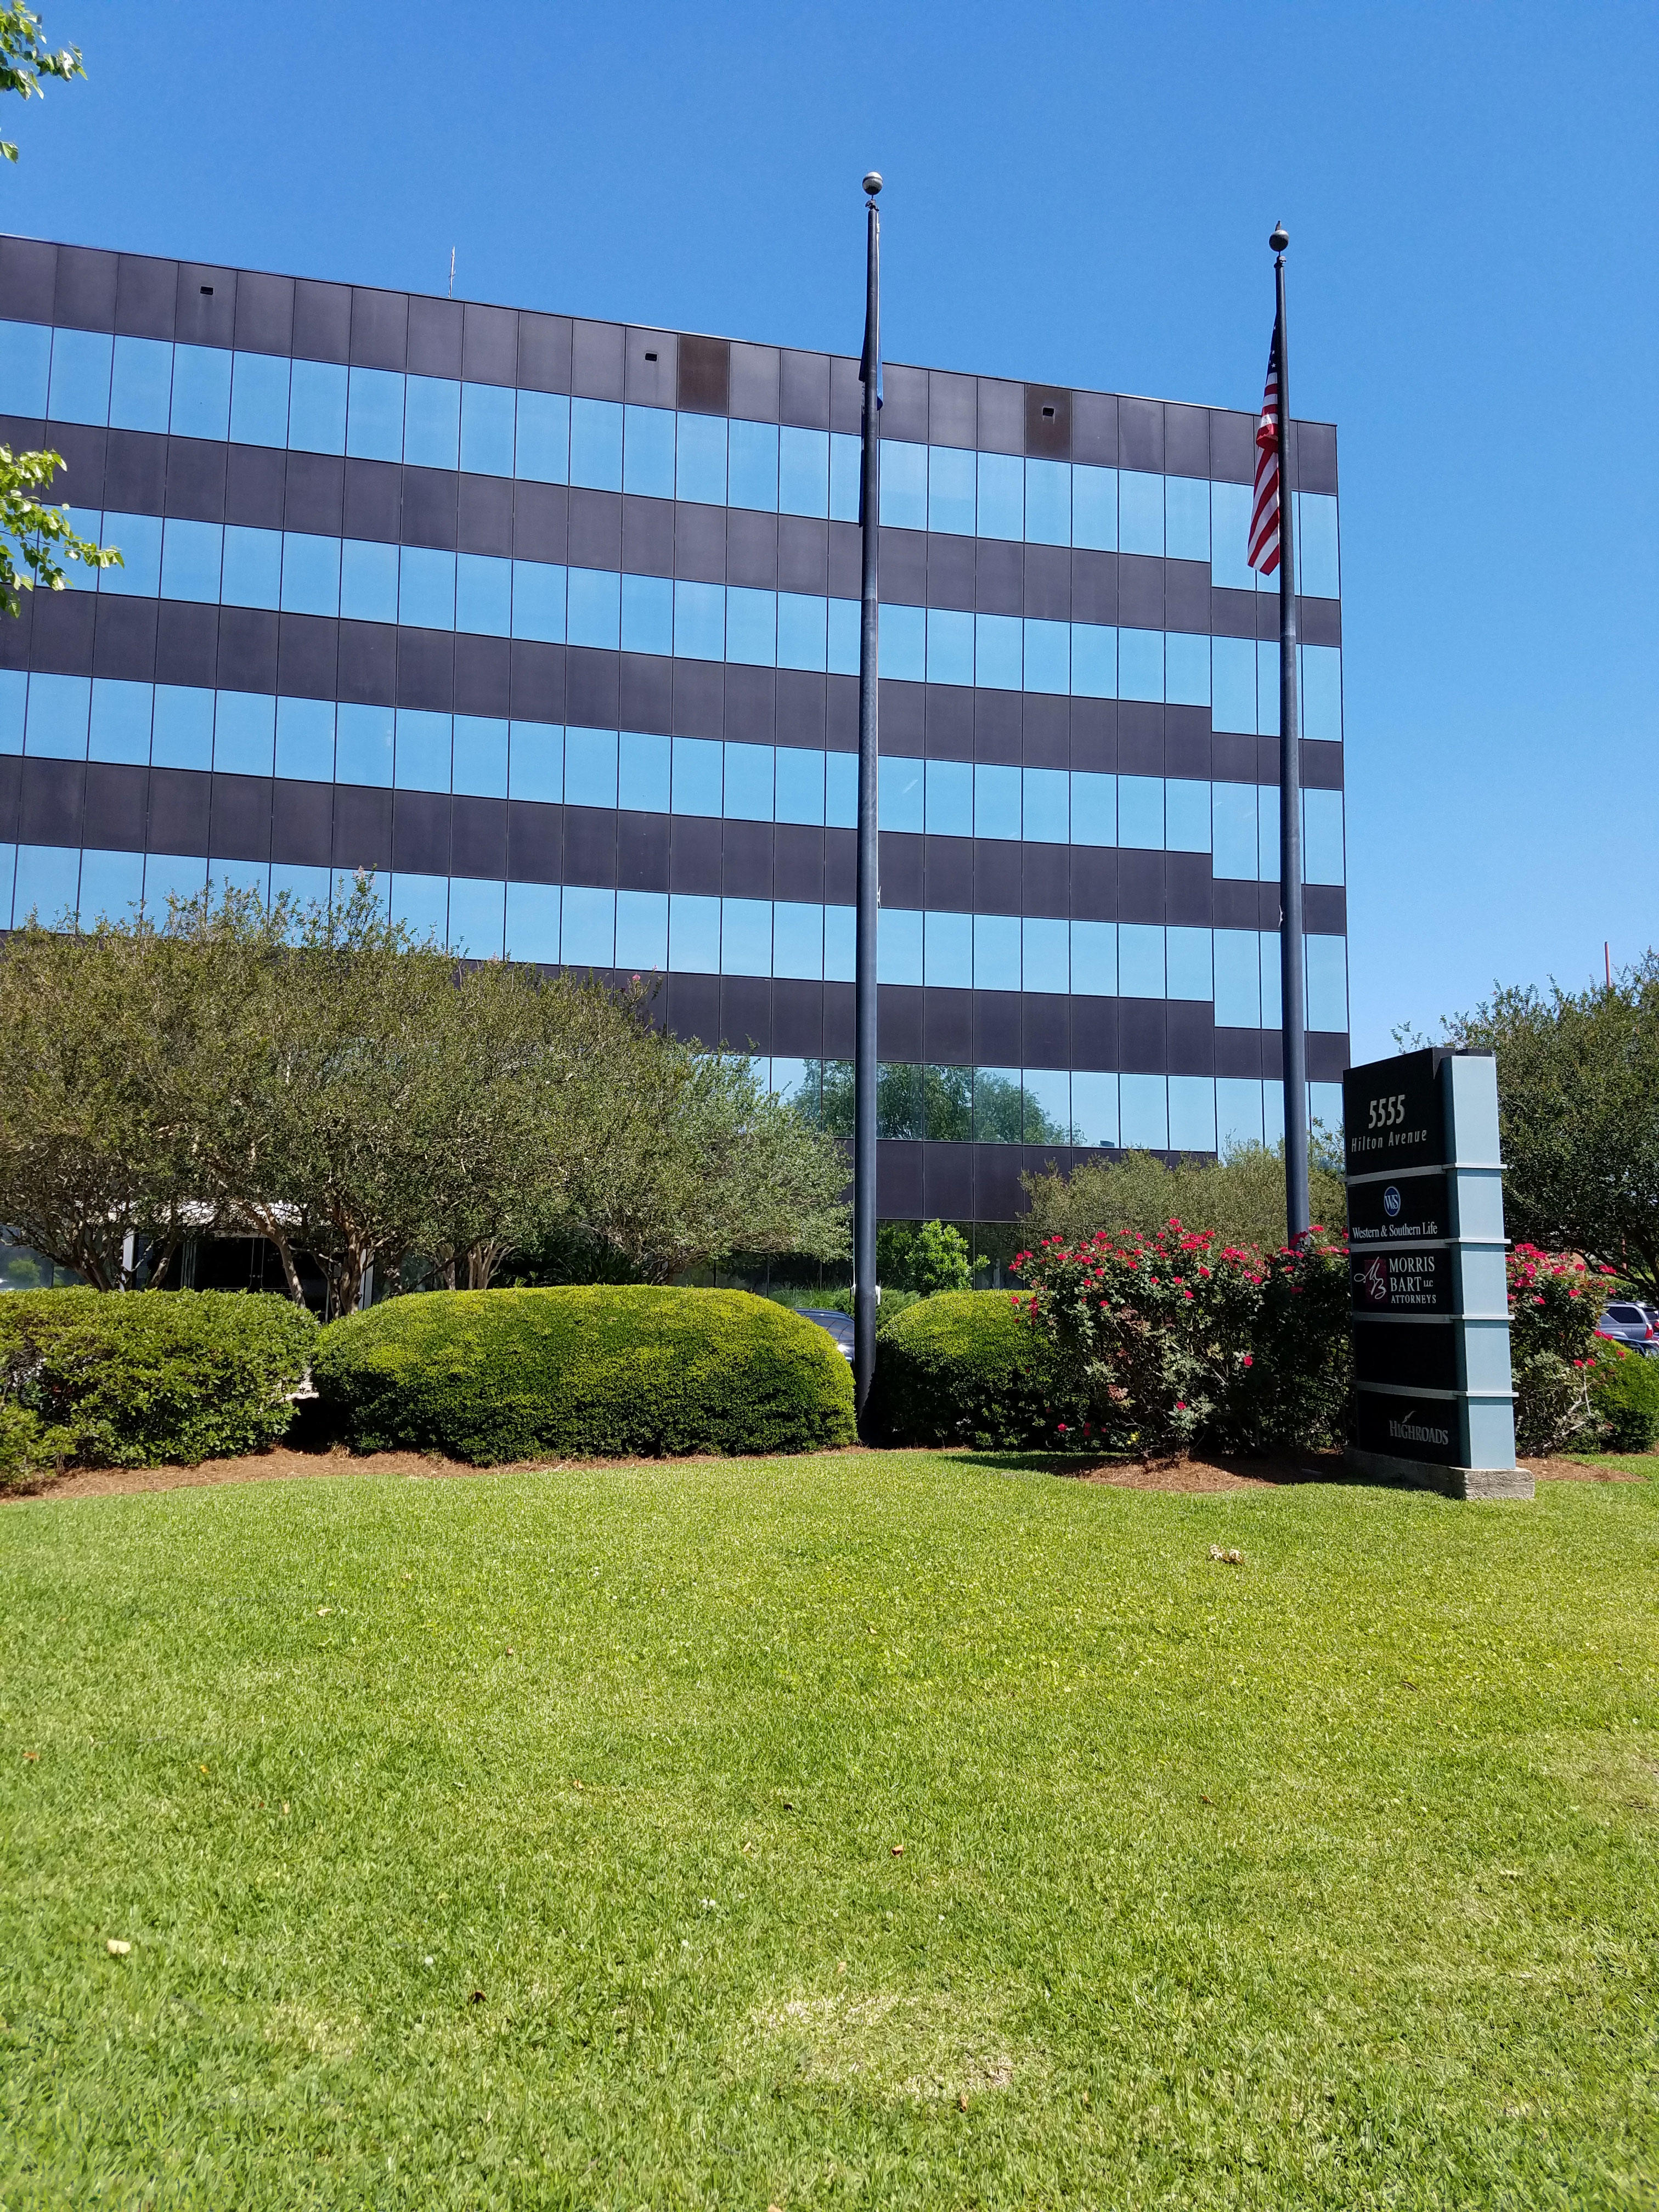 Morris Bart's Baton Rouge office is located in the Xerox Building.